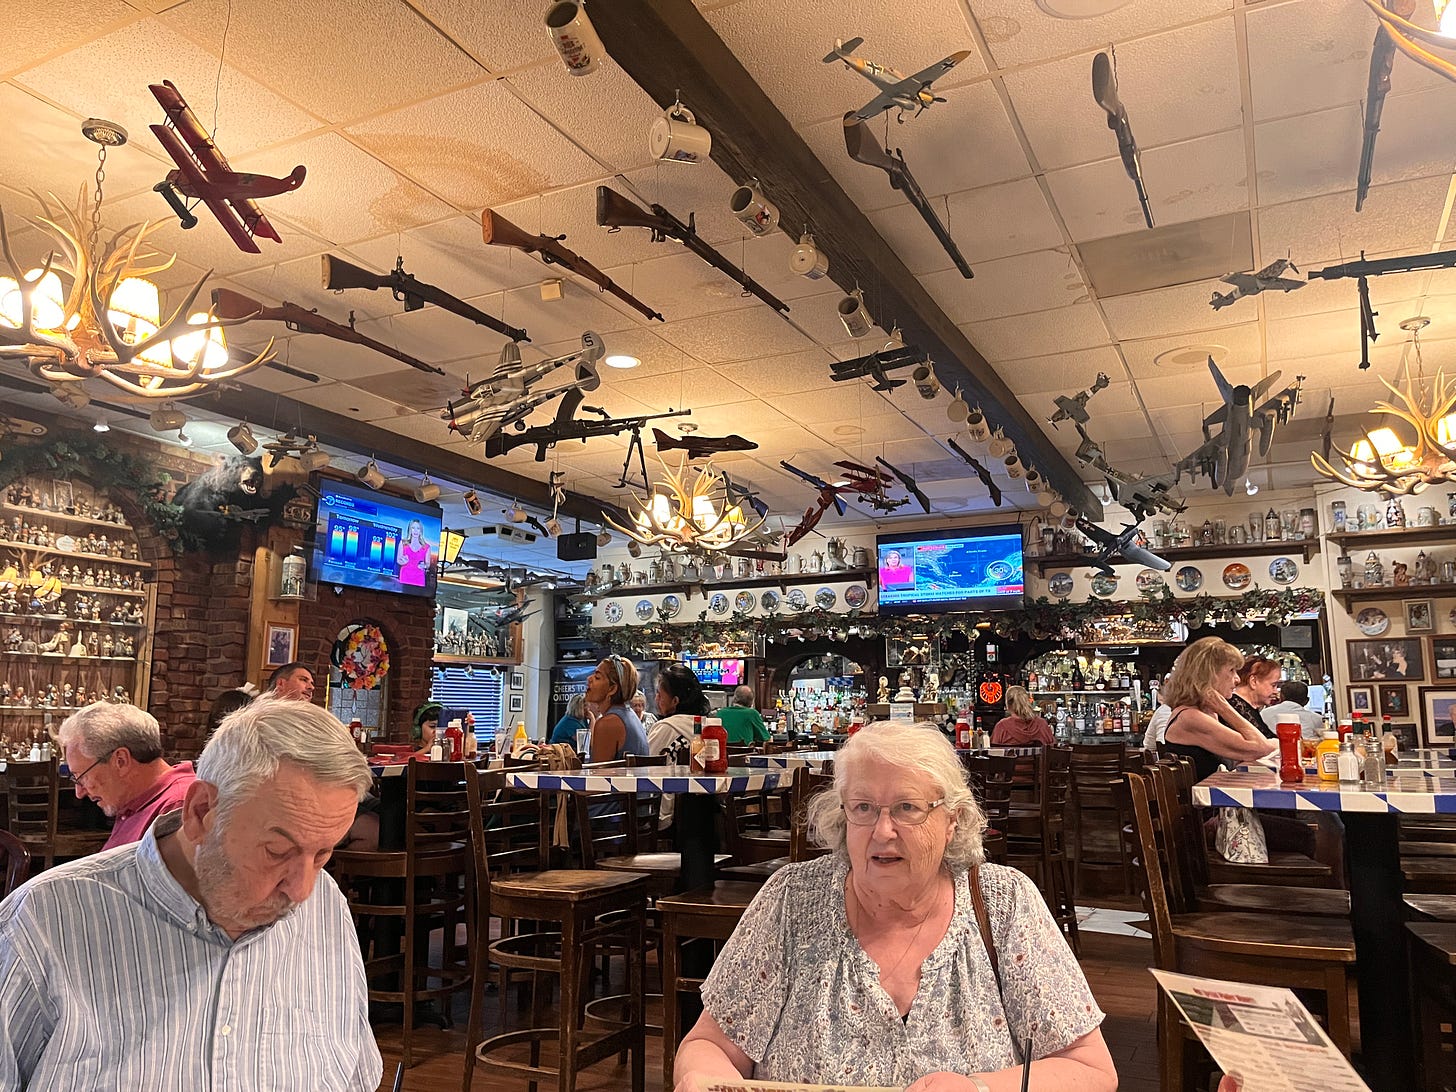 Kitsch filled overwhelming view of German restaurant with my parents at a table and all manner of guns hanging from the ceiling